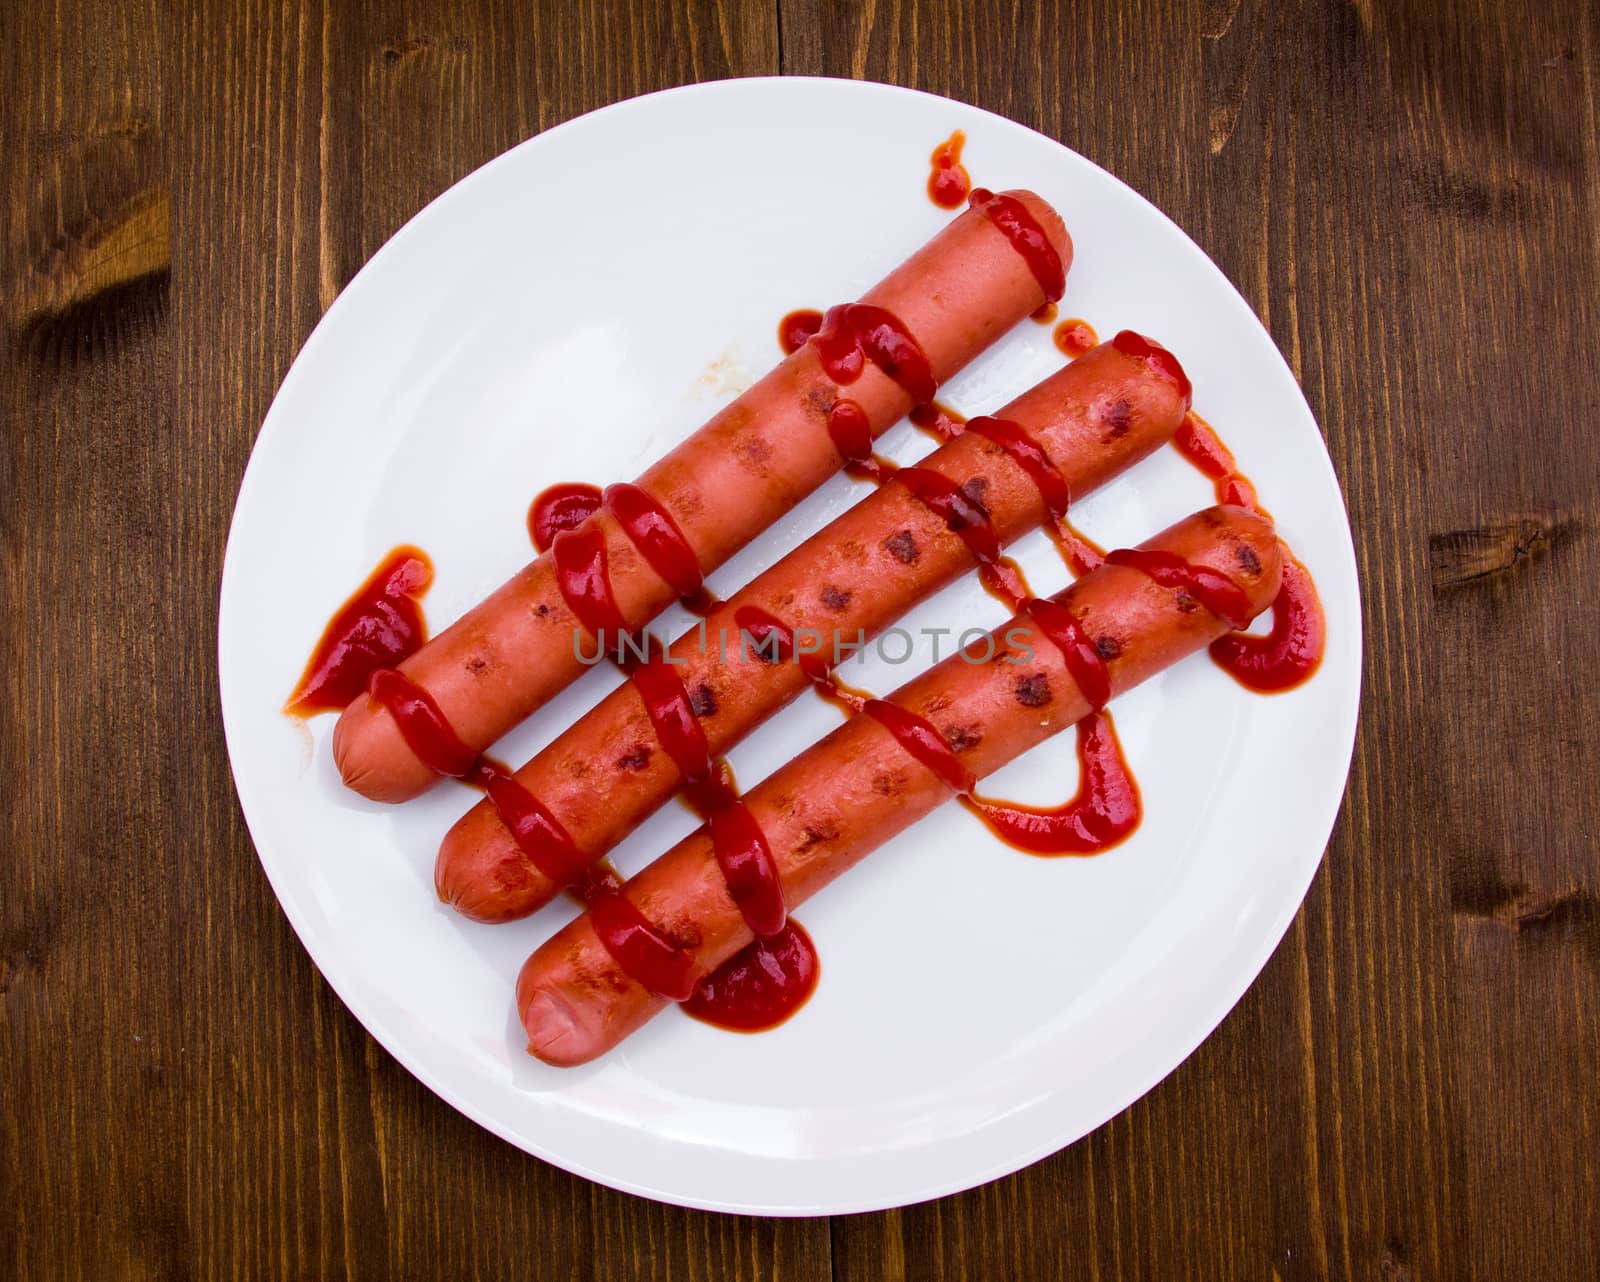 Sausages with tomato sauce on wooden table seen from above